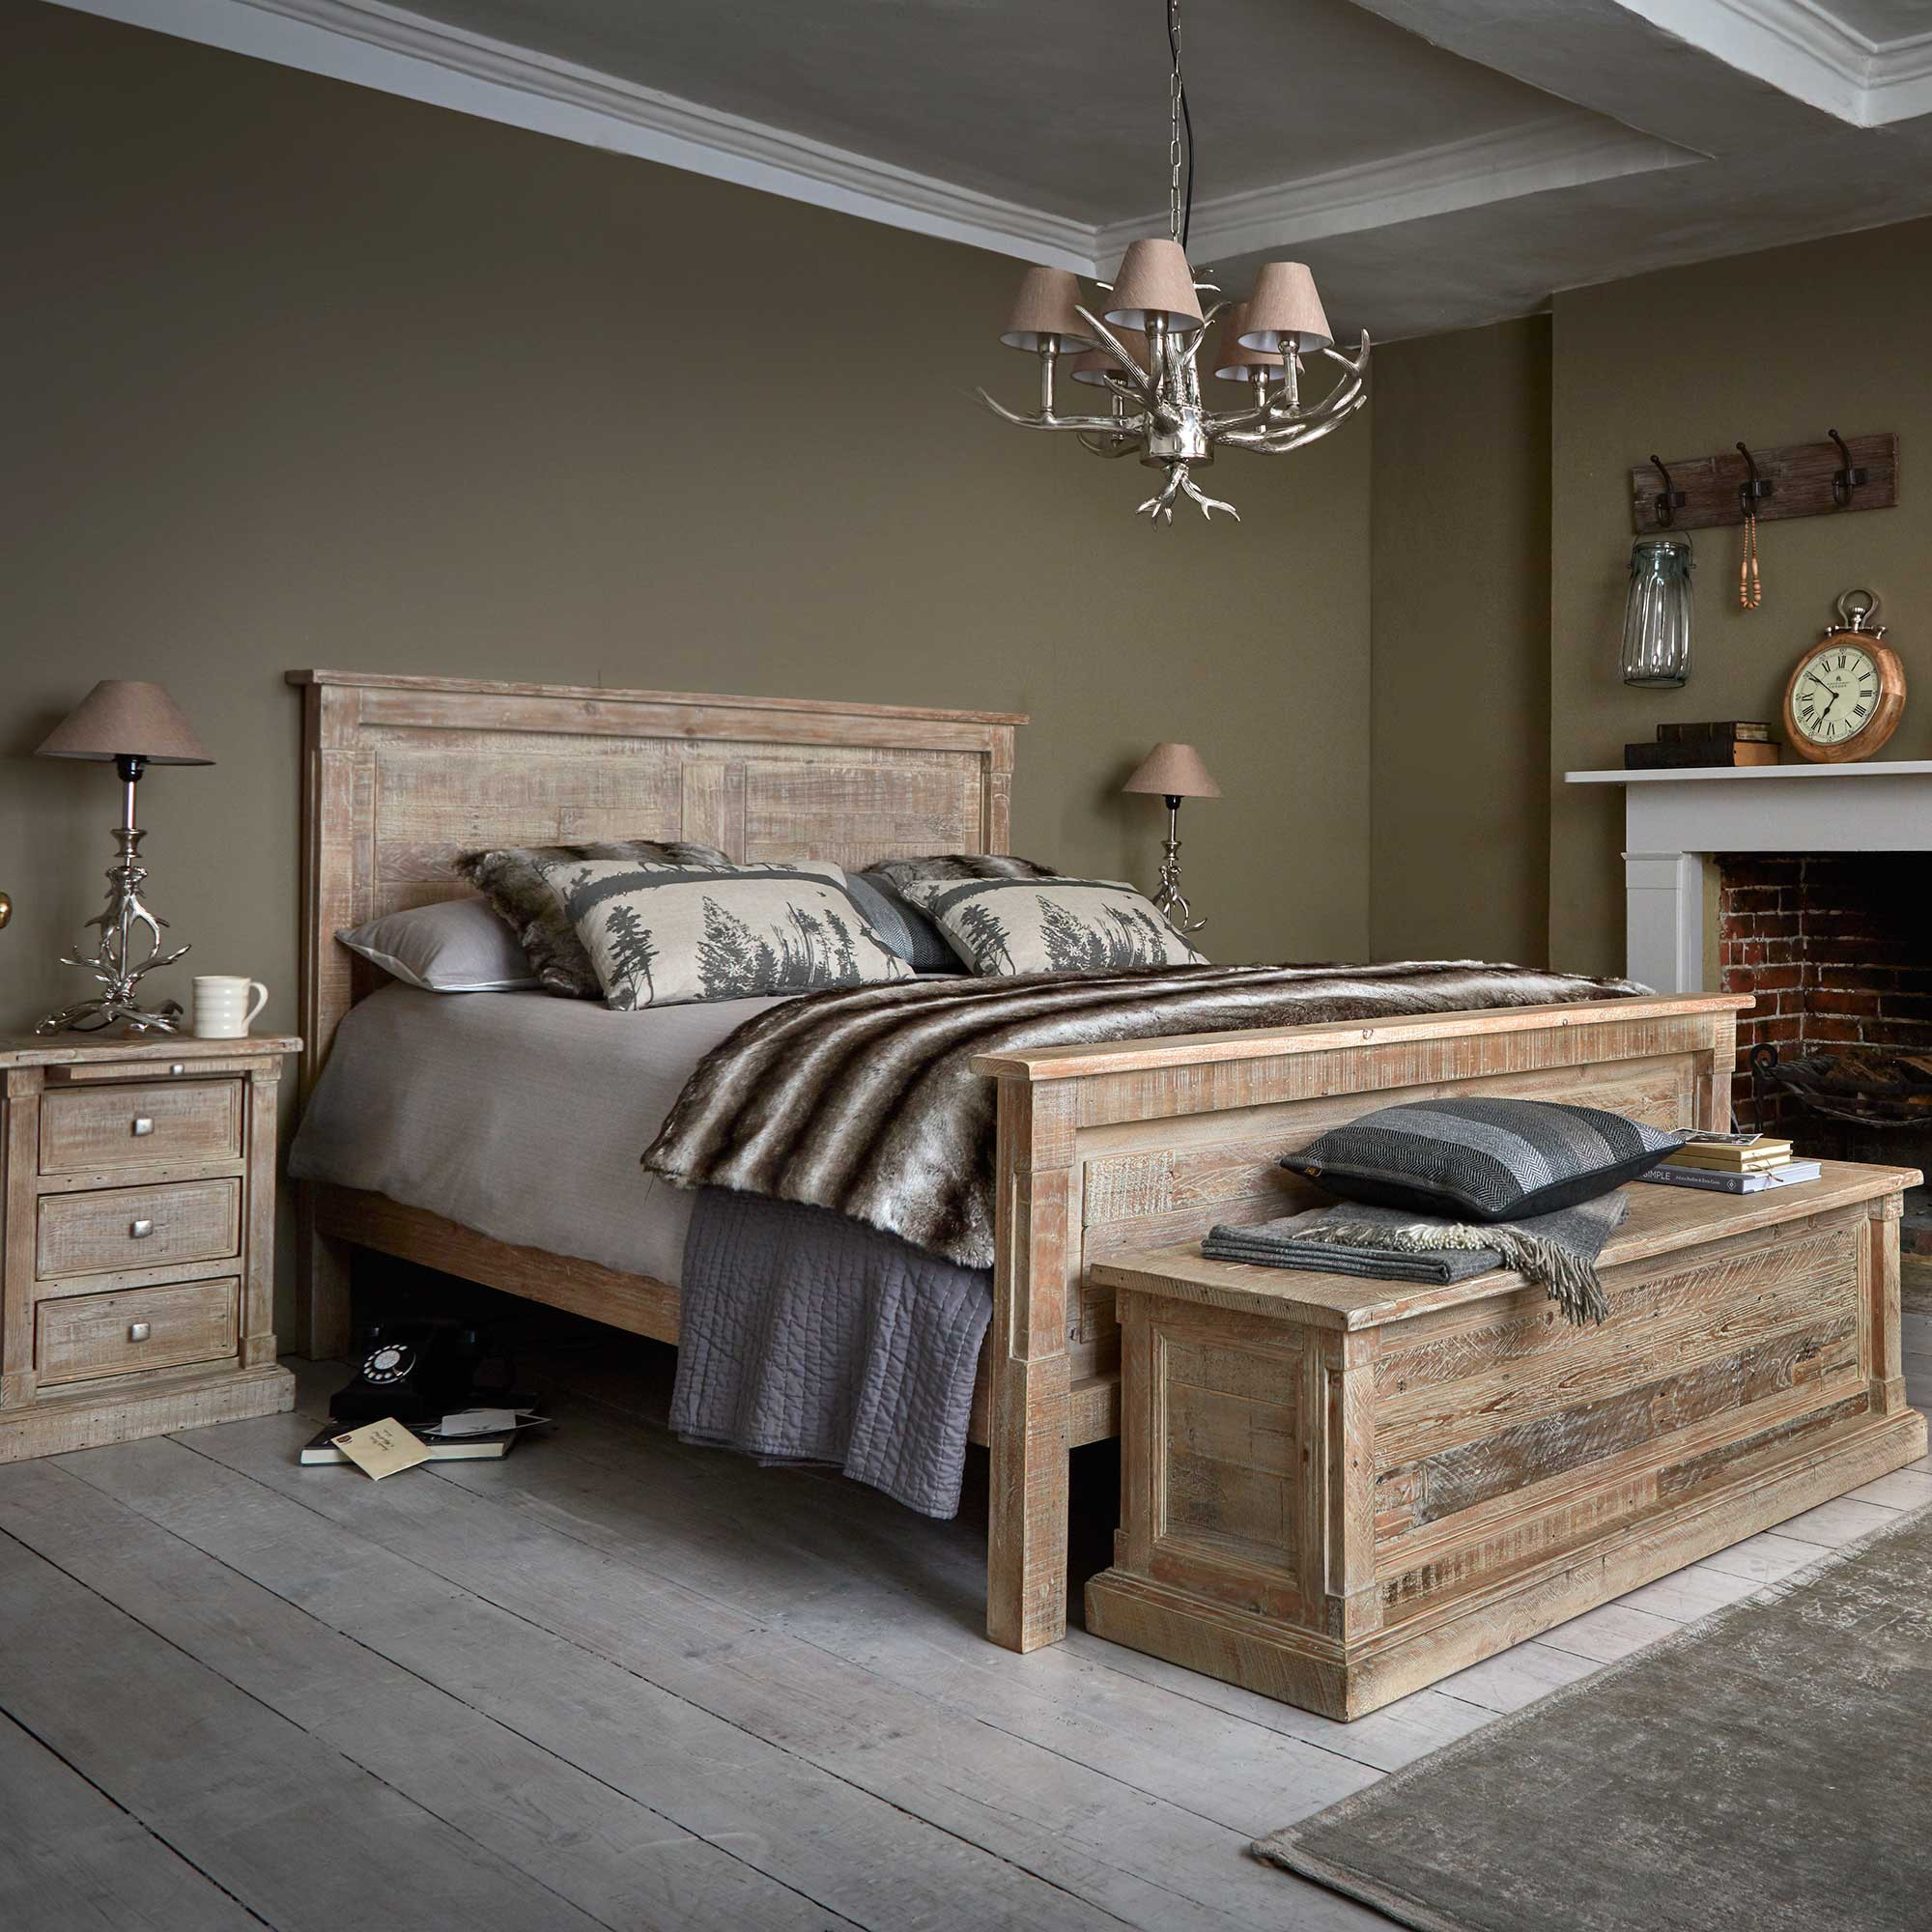 Rustic Wood Bedroom Sets
 Bring in the New with our Winter Sale Picks Your House